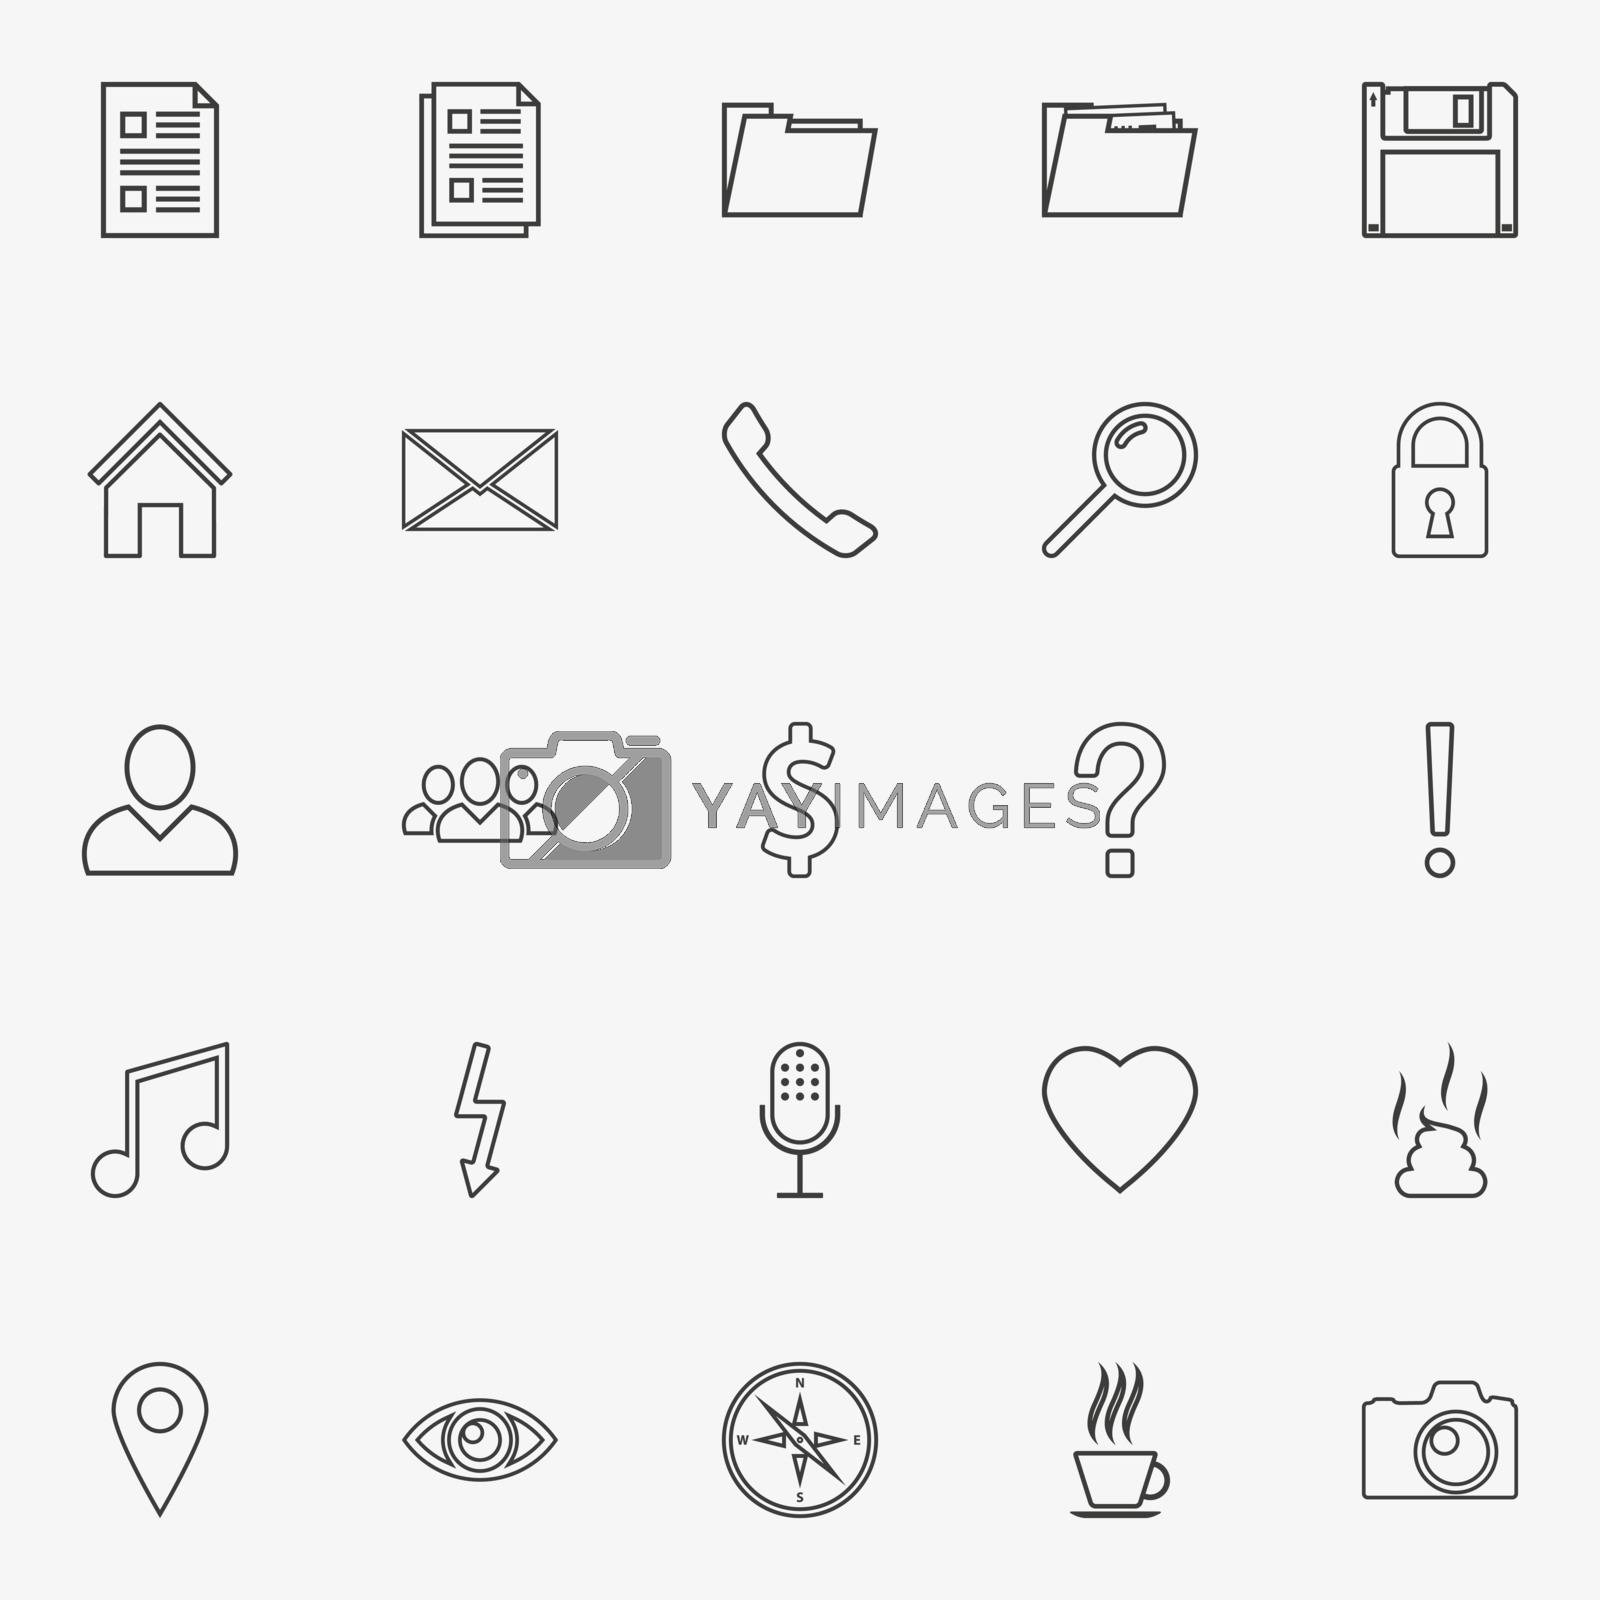 Royalty free image of Vector stroke icons by ggebl